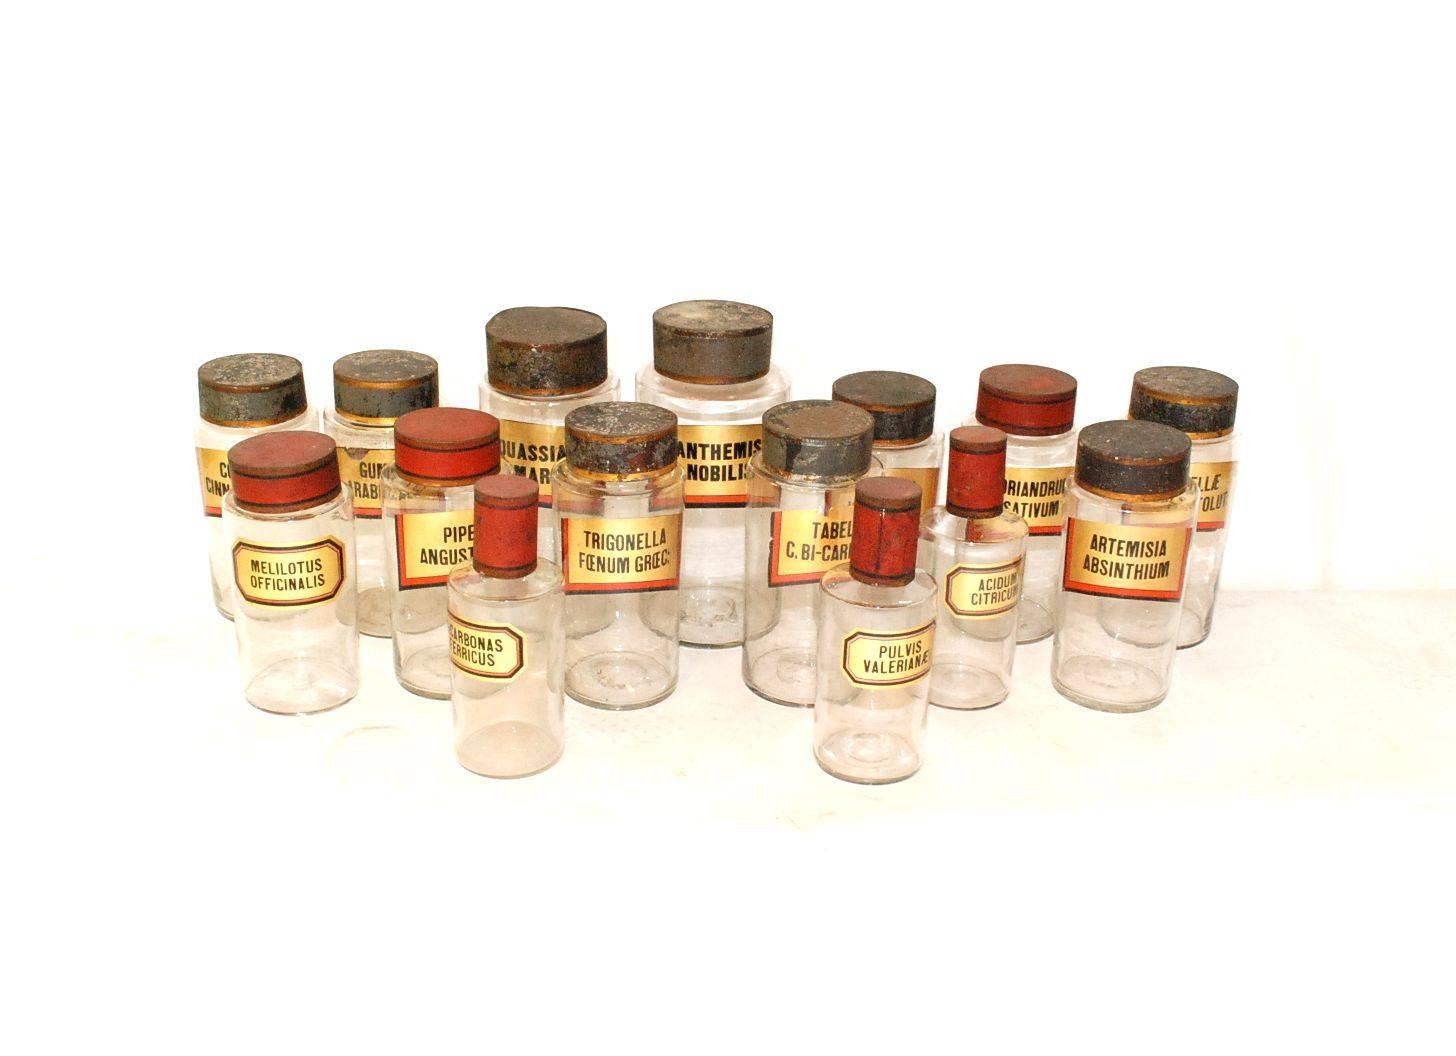 Late 19th century early 1900s rare set of 15 pharmacy glass jars with gold leaf details and zinc cover.

Here dimensions:
Total 15.

2 = height: 12